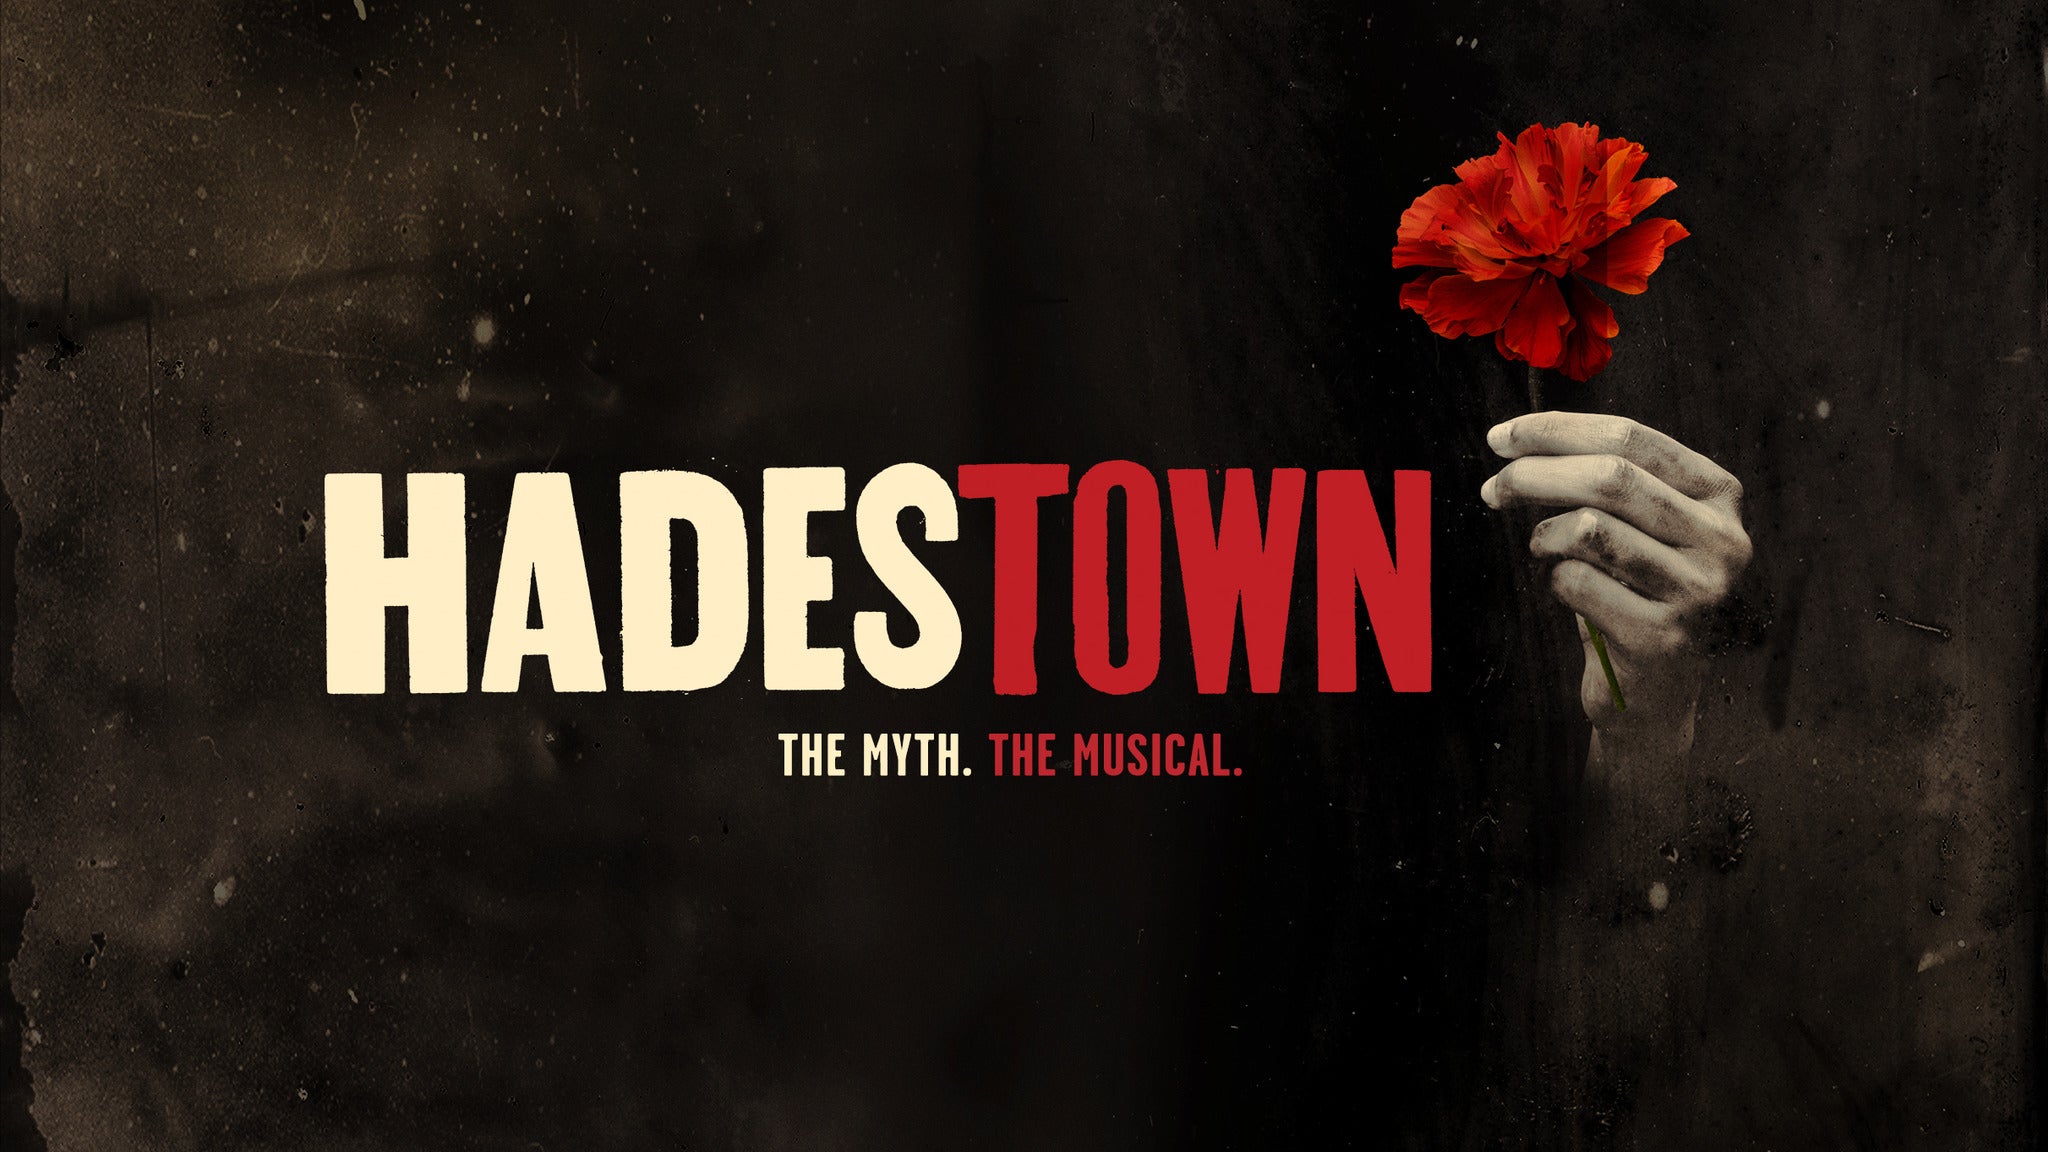 Hadestown at Dr. Phillips Performing Arts Center